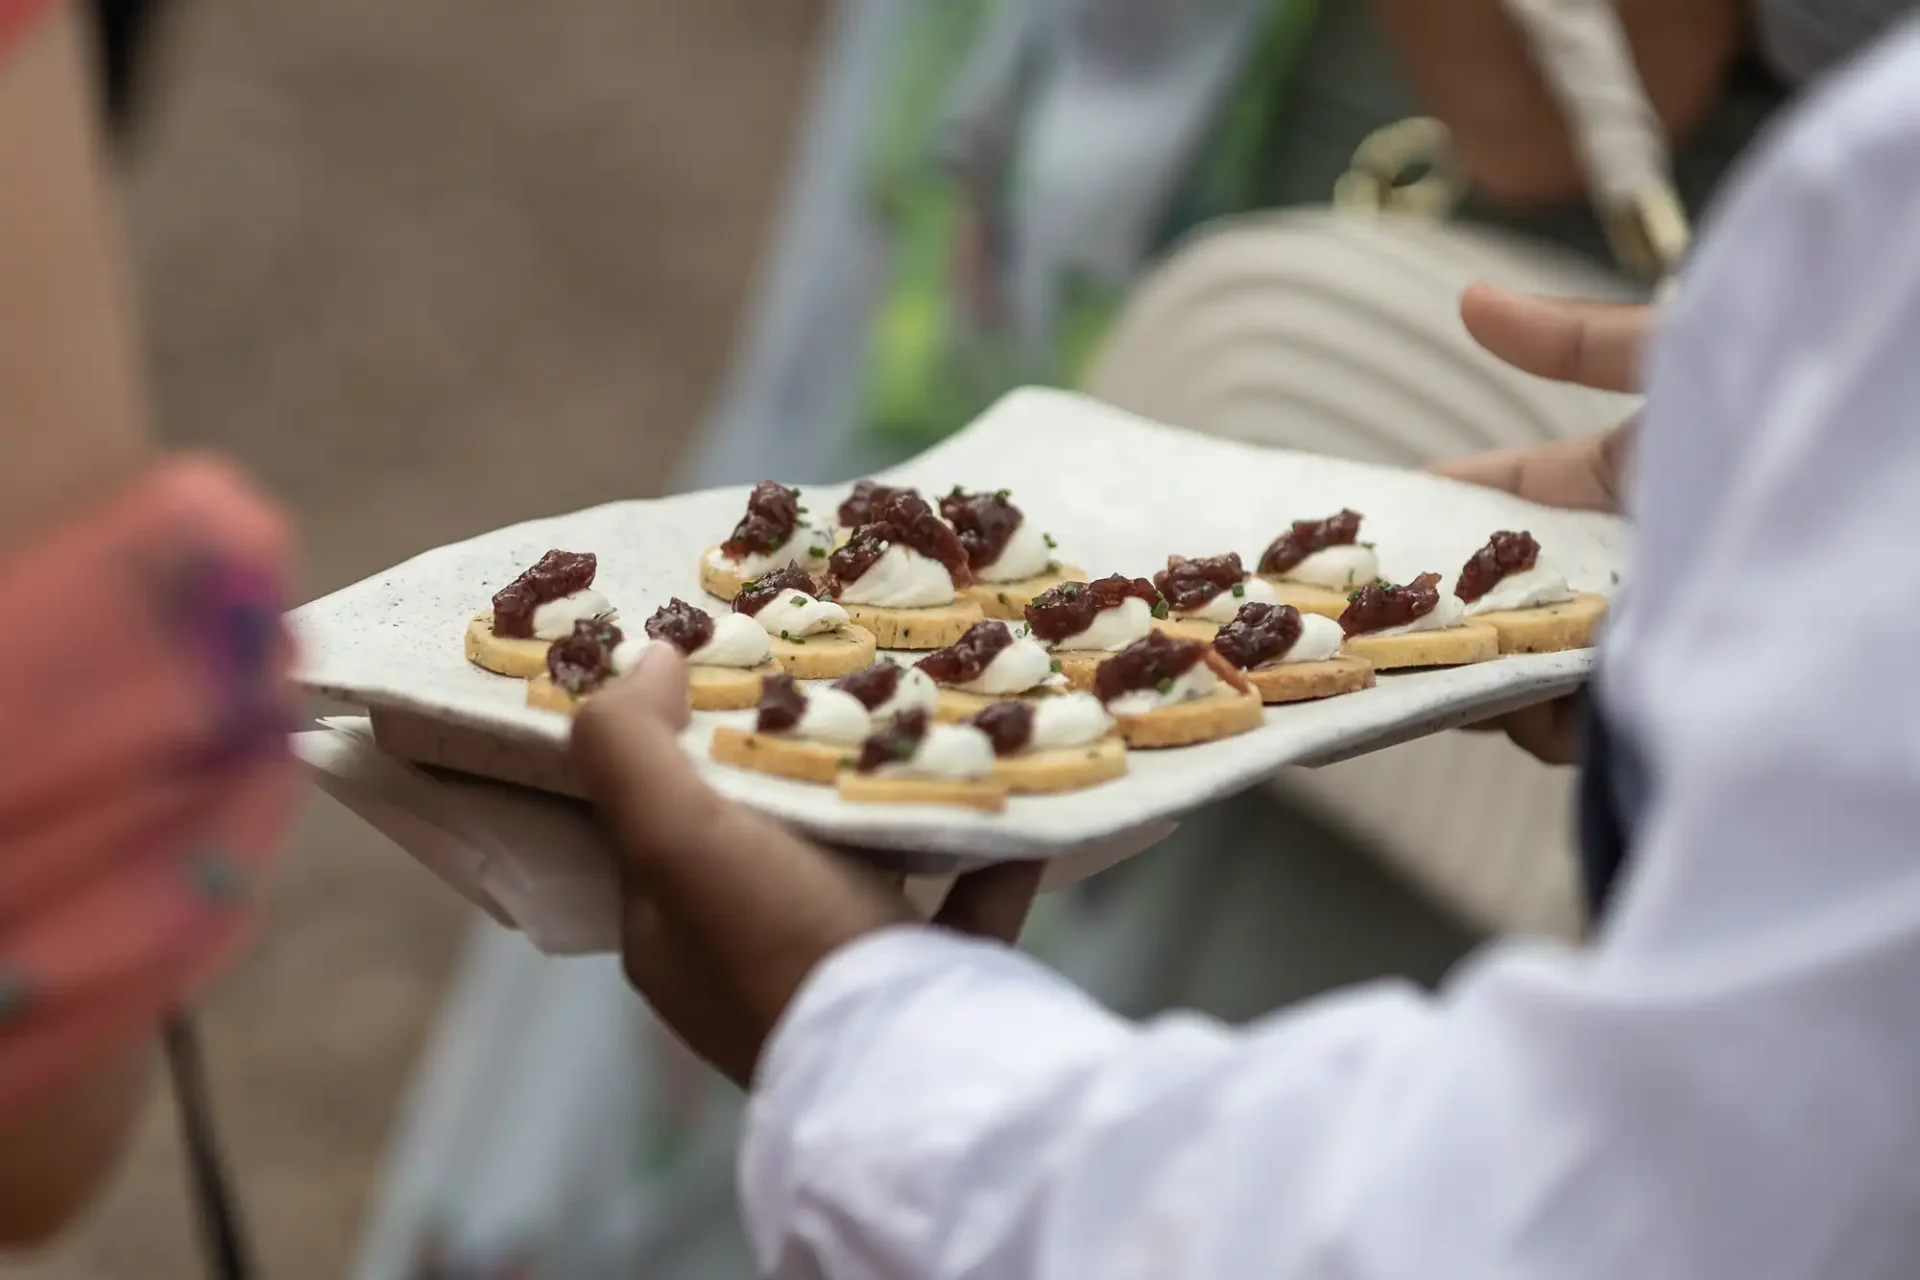 A person holds a tray of hors d'oeuvres, featuring small toasts topped with cheese and a dark fruit compote, at an outdoor event.